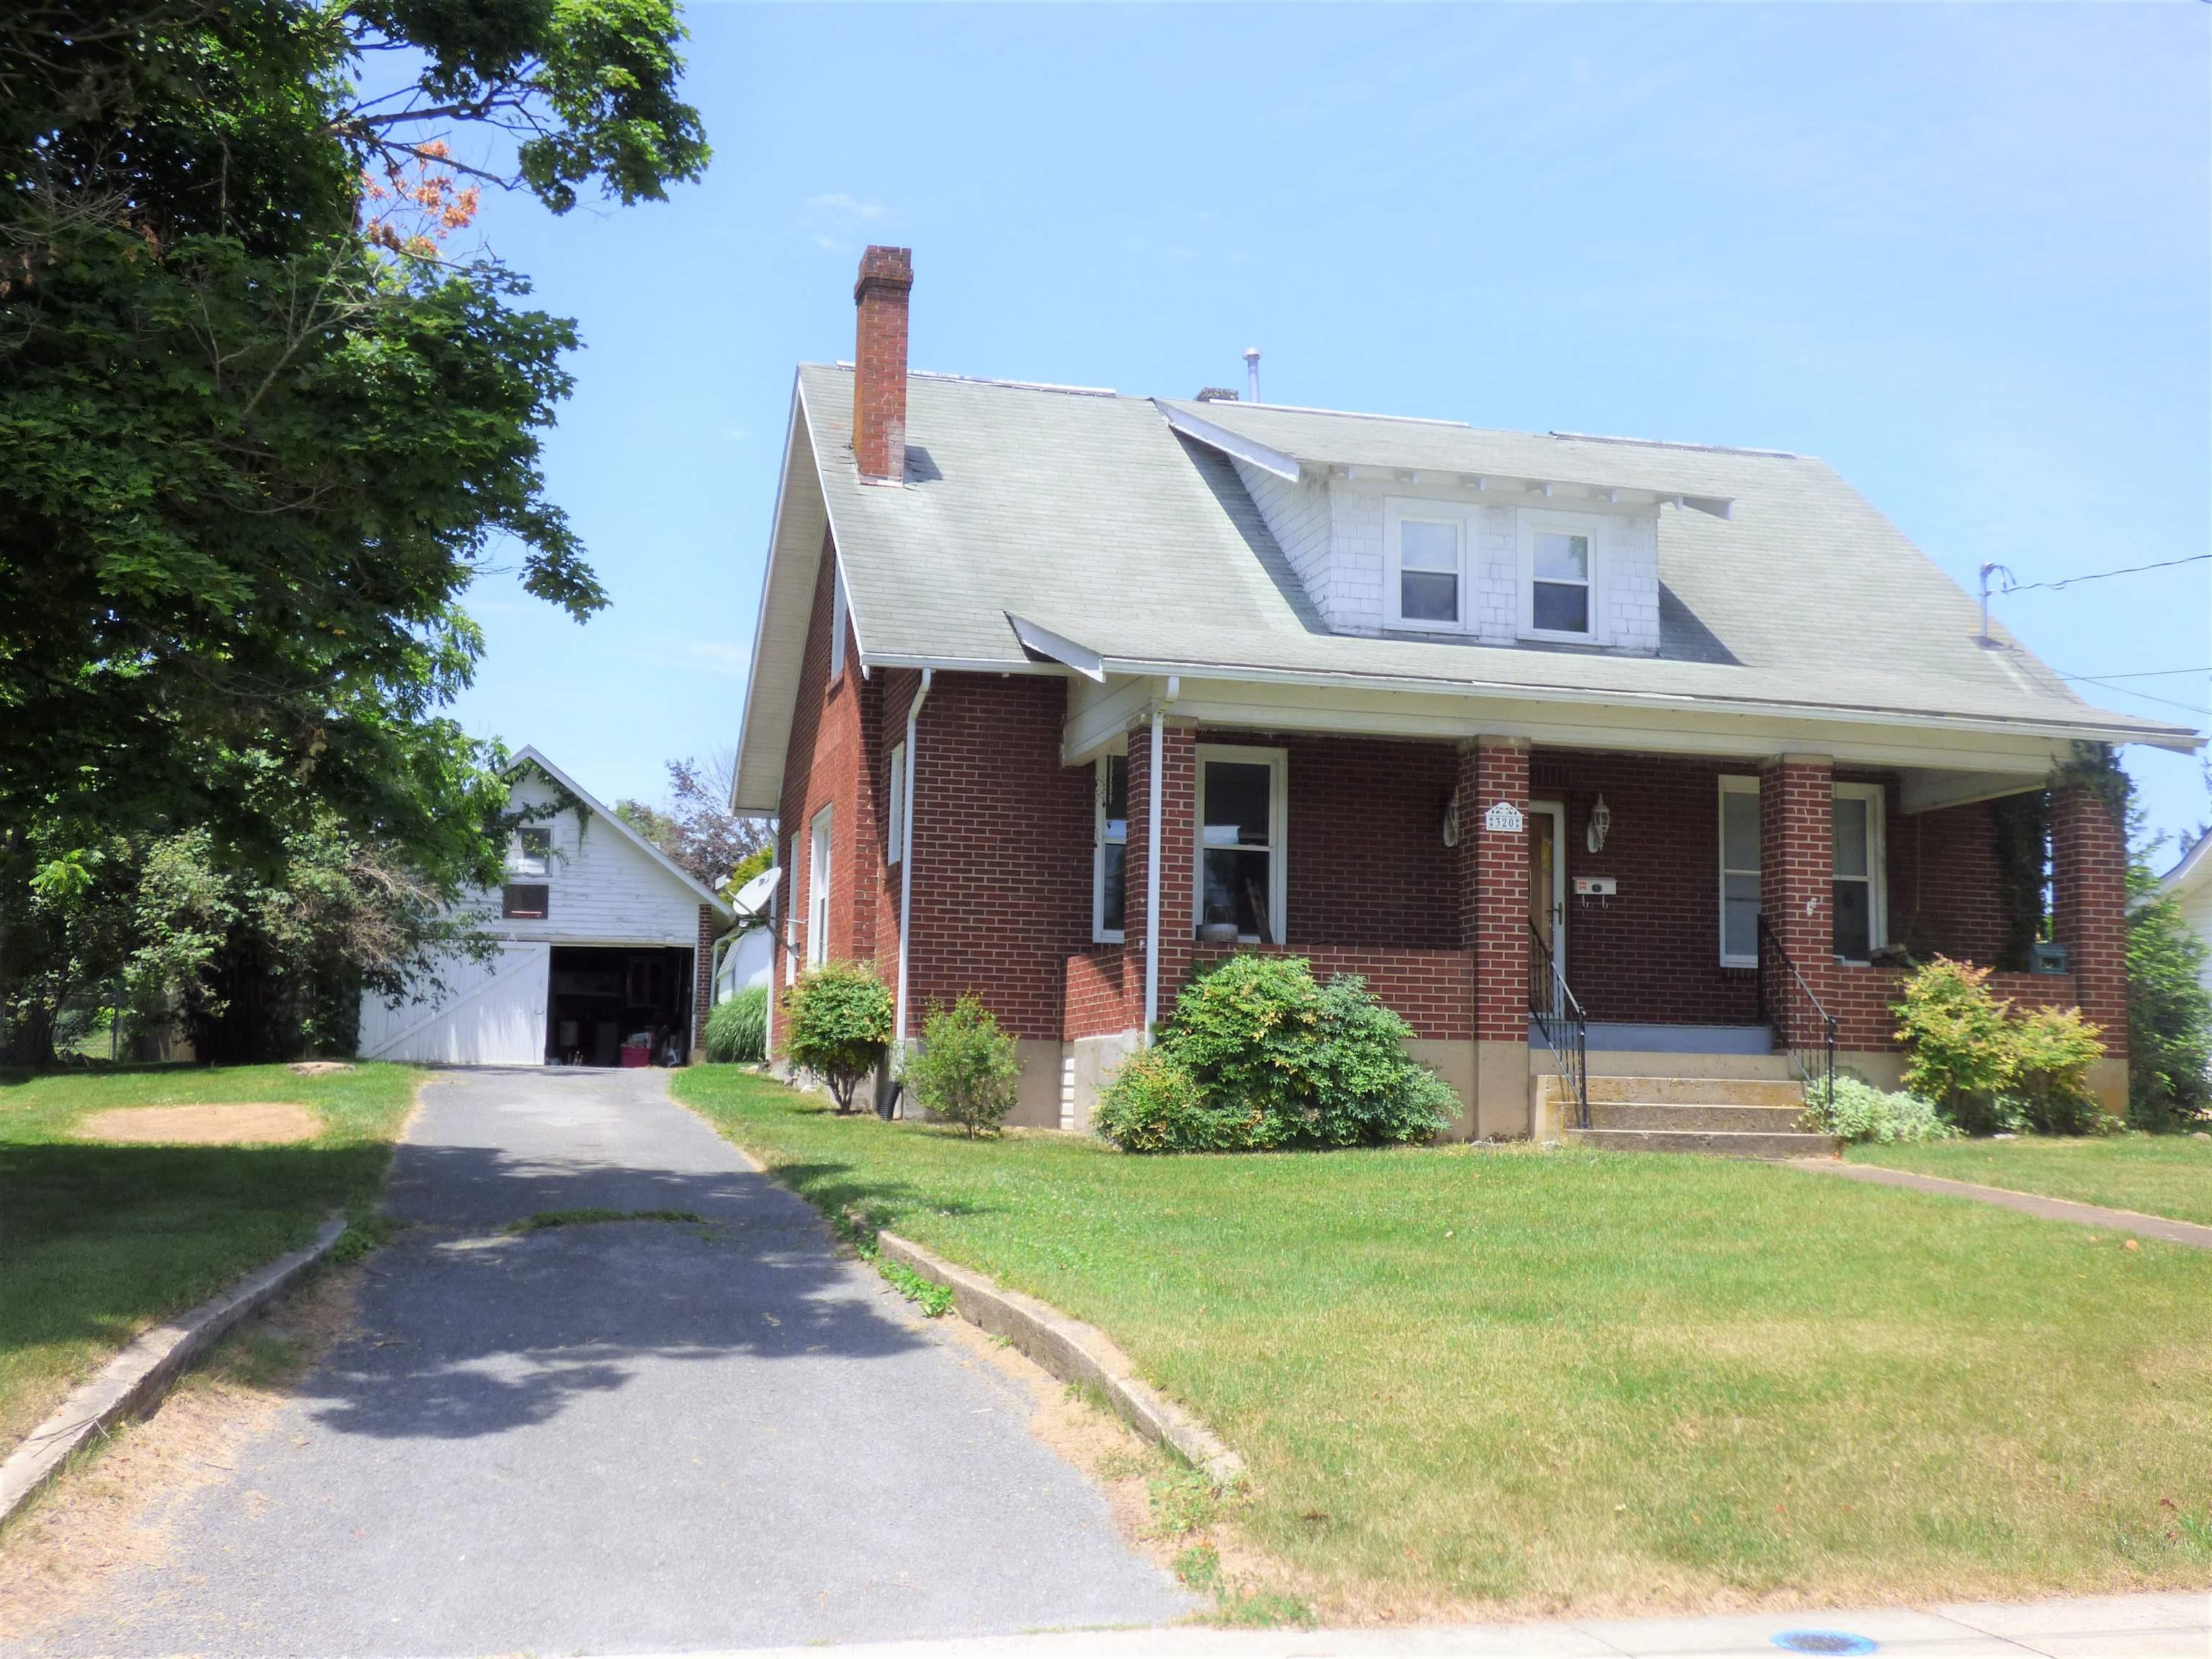 This home is in the heart of downtown Wytheville with-in walking distance to downtown, schools, parks, restaurants, ect. This 4-bedroom, 2 Bath Cape Code home has 10 ft ceilings, hardwood floors, new windows, new gas furnace, office with Oak built-ins, screened in back porch and fenced backyard.